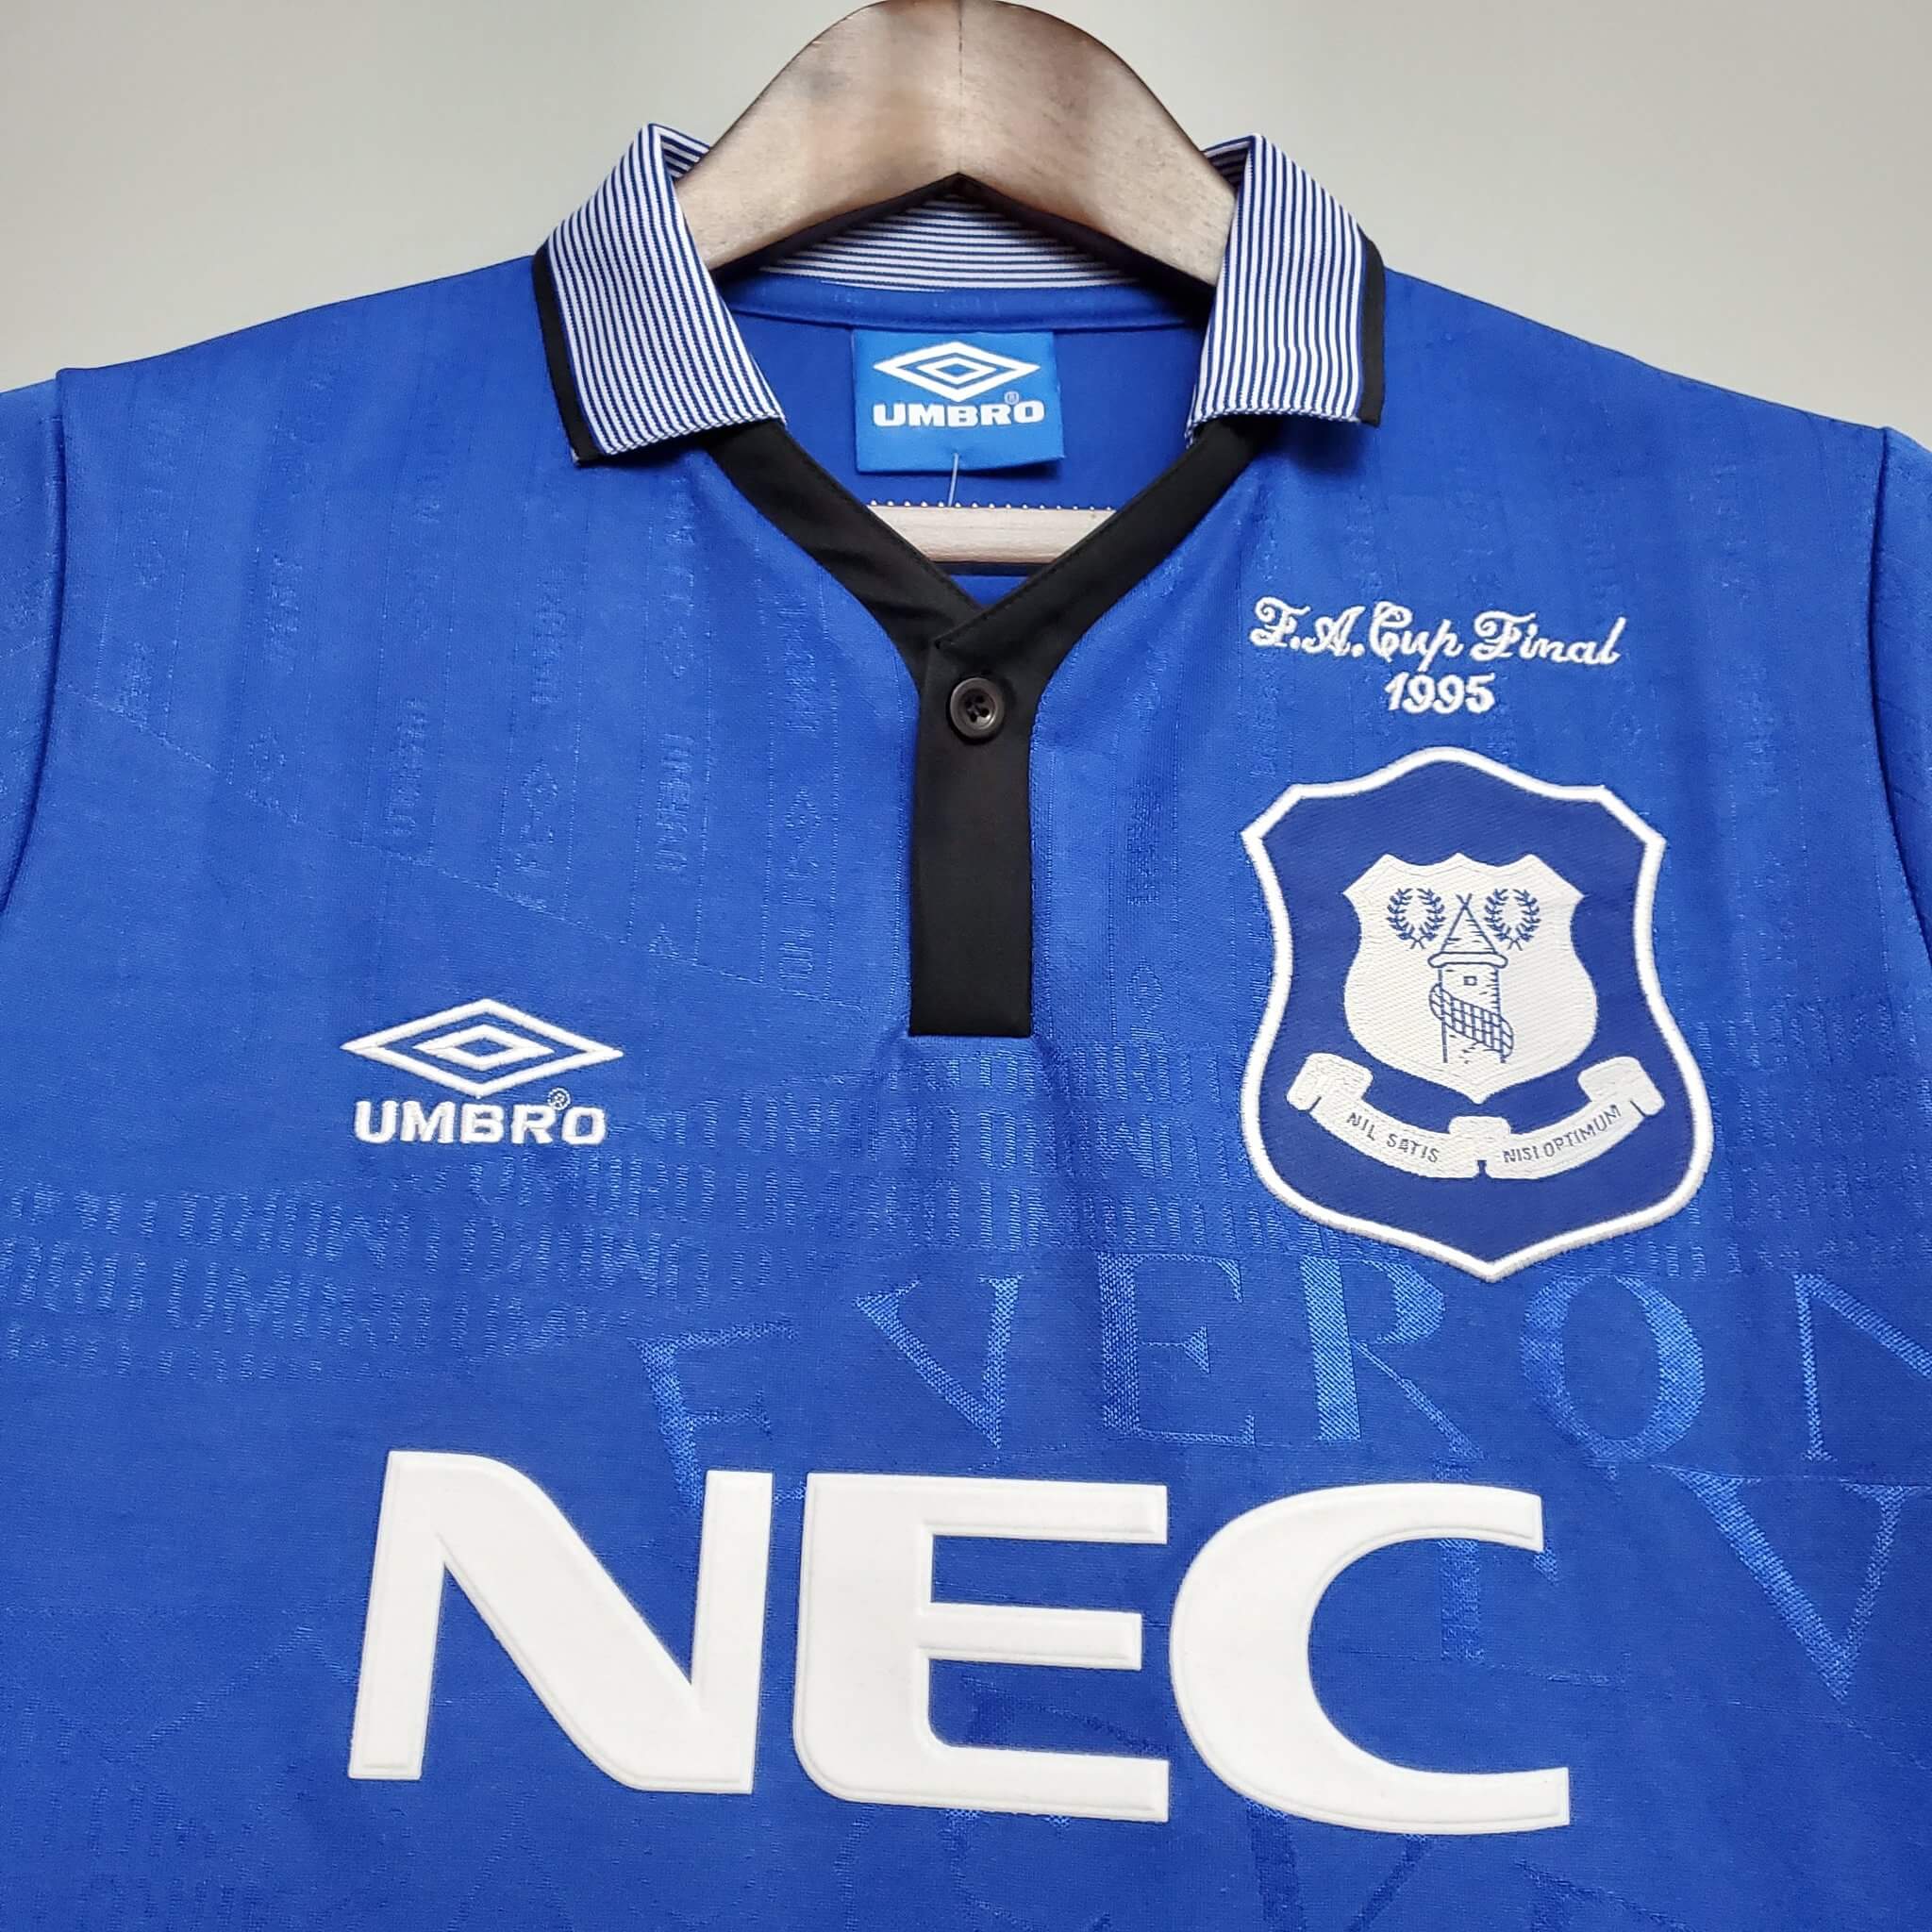 Everton 1994/1995 Home Kit (FA Cup Final) – The Football Heritage